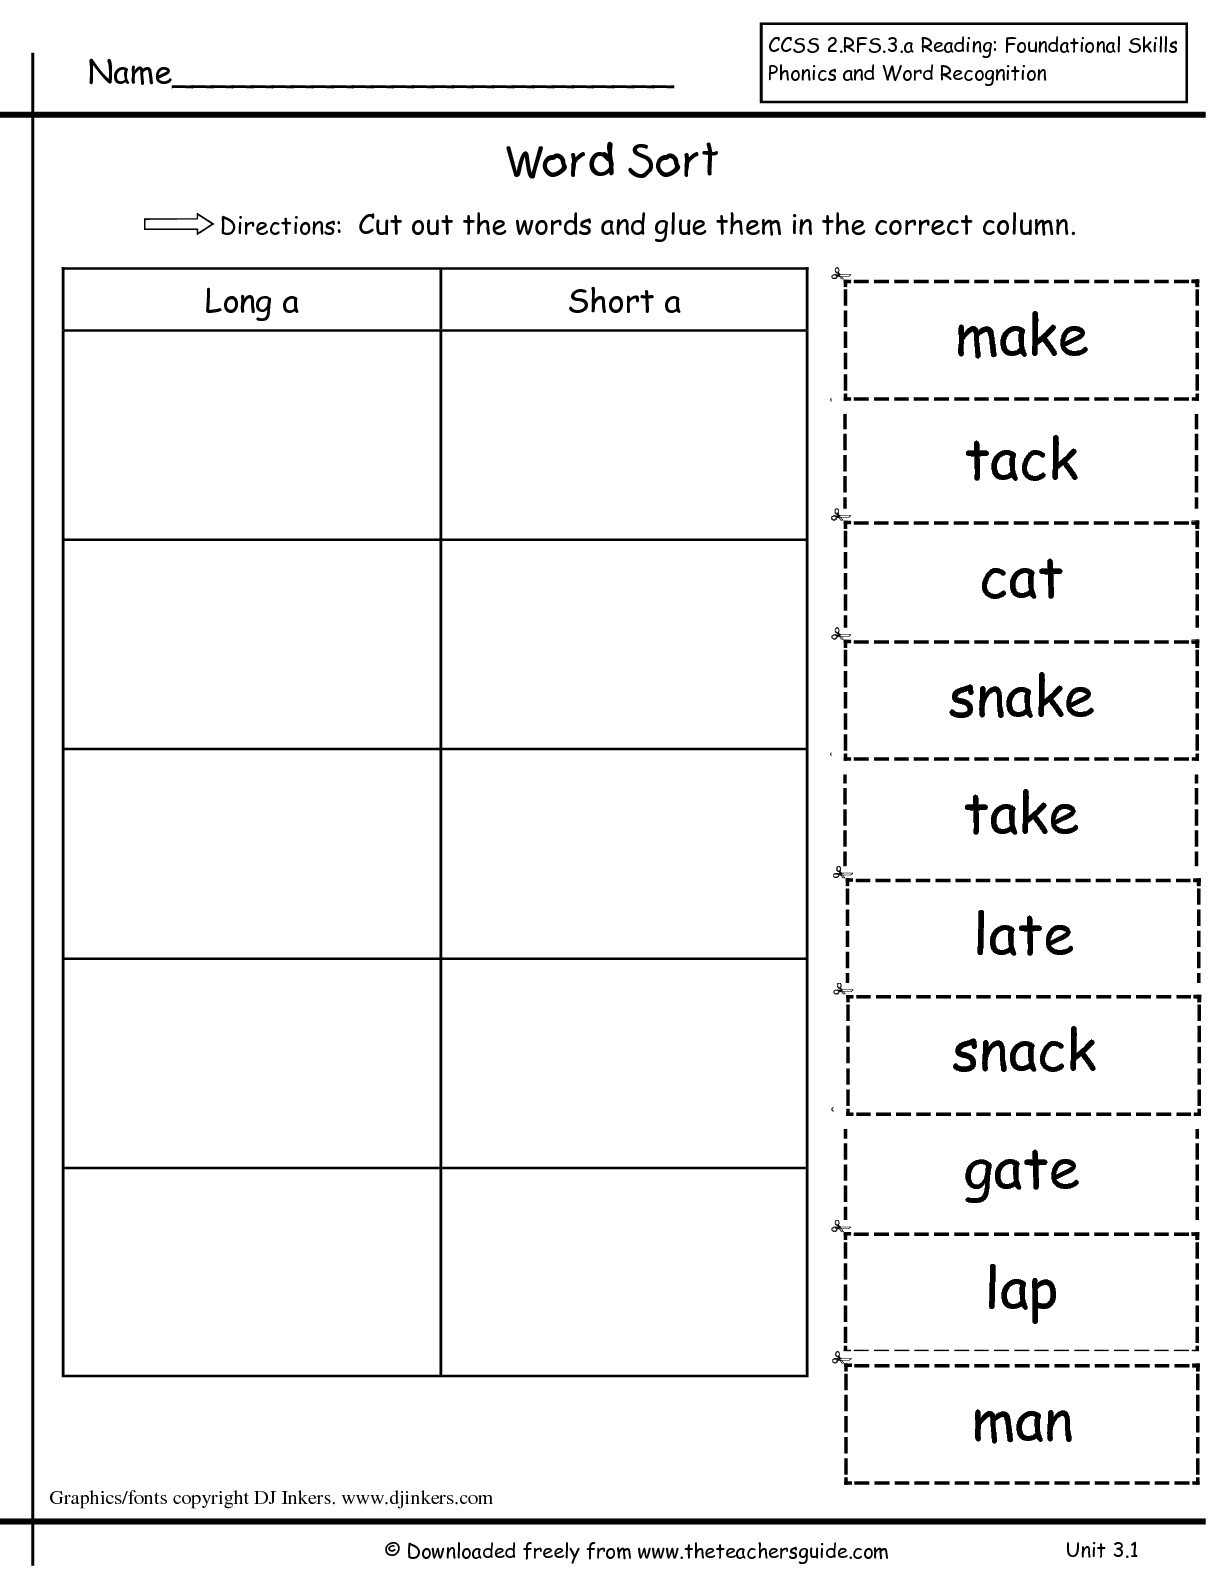 Sorting Worksheets for First Grade Free Spelling Worksheets for First Grade ÙÙ ÙØ³Ø¨Ù ÙÙ ÙØ ÙÙ